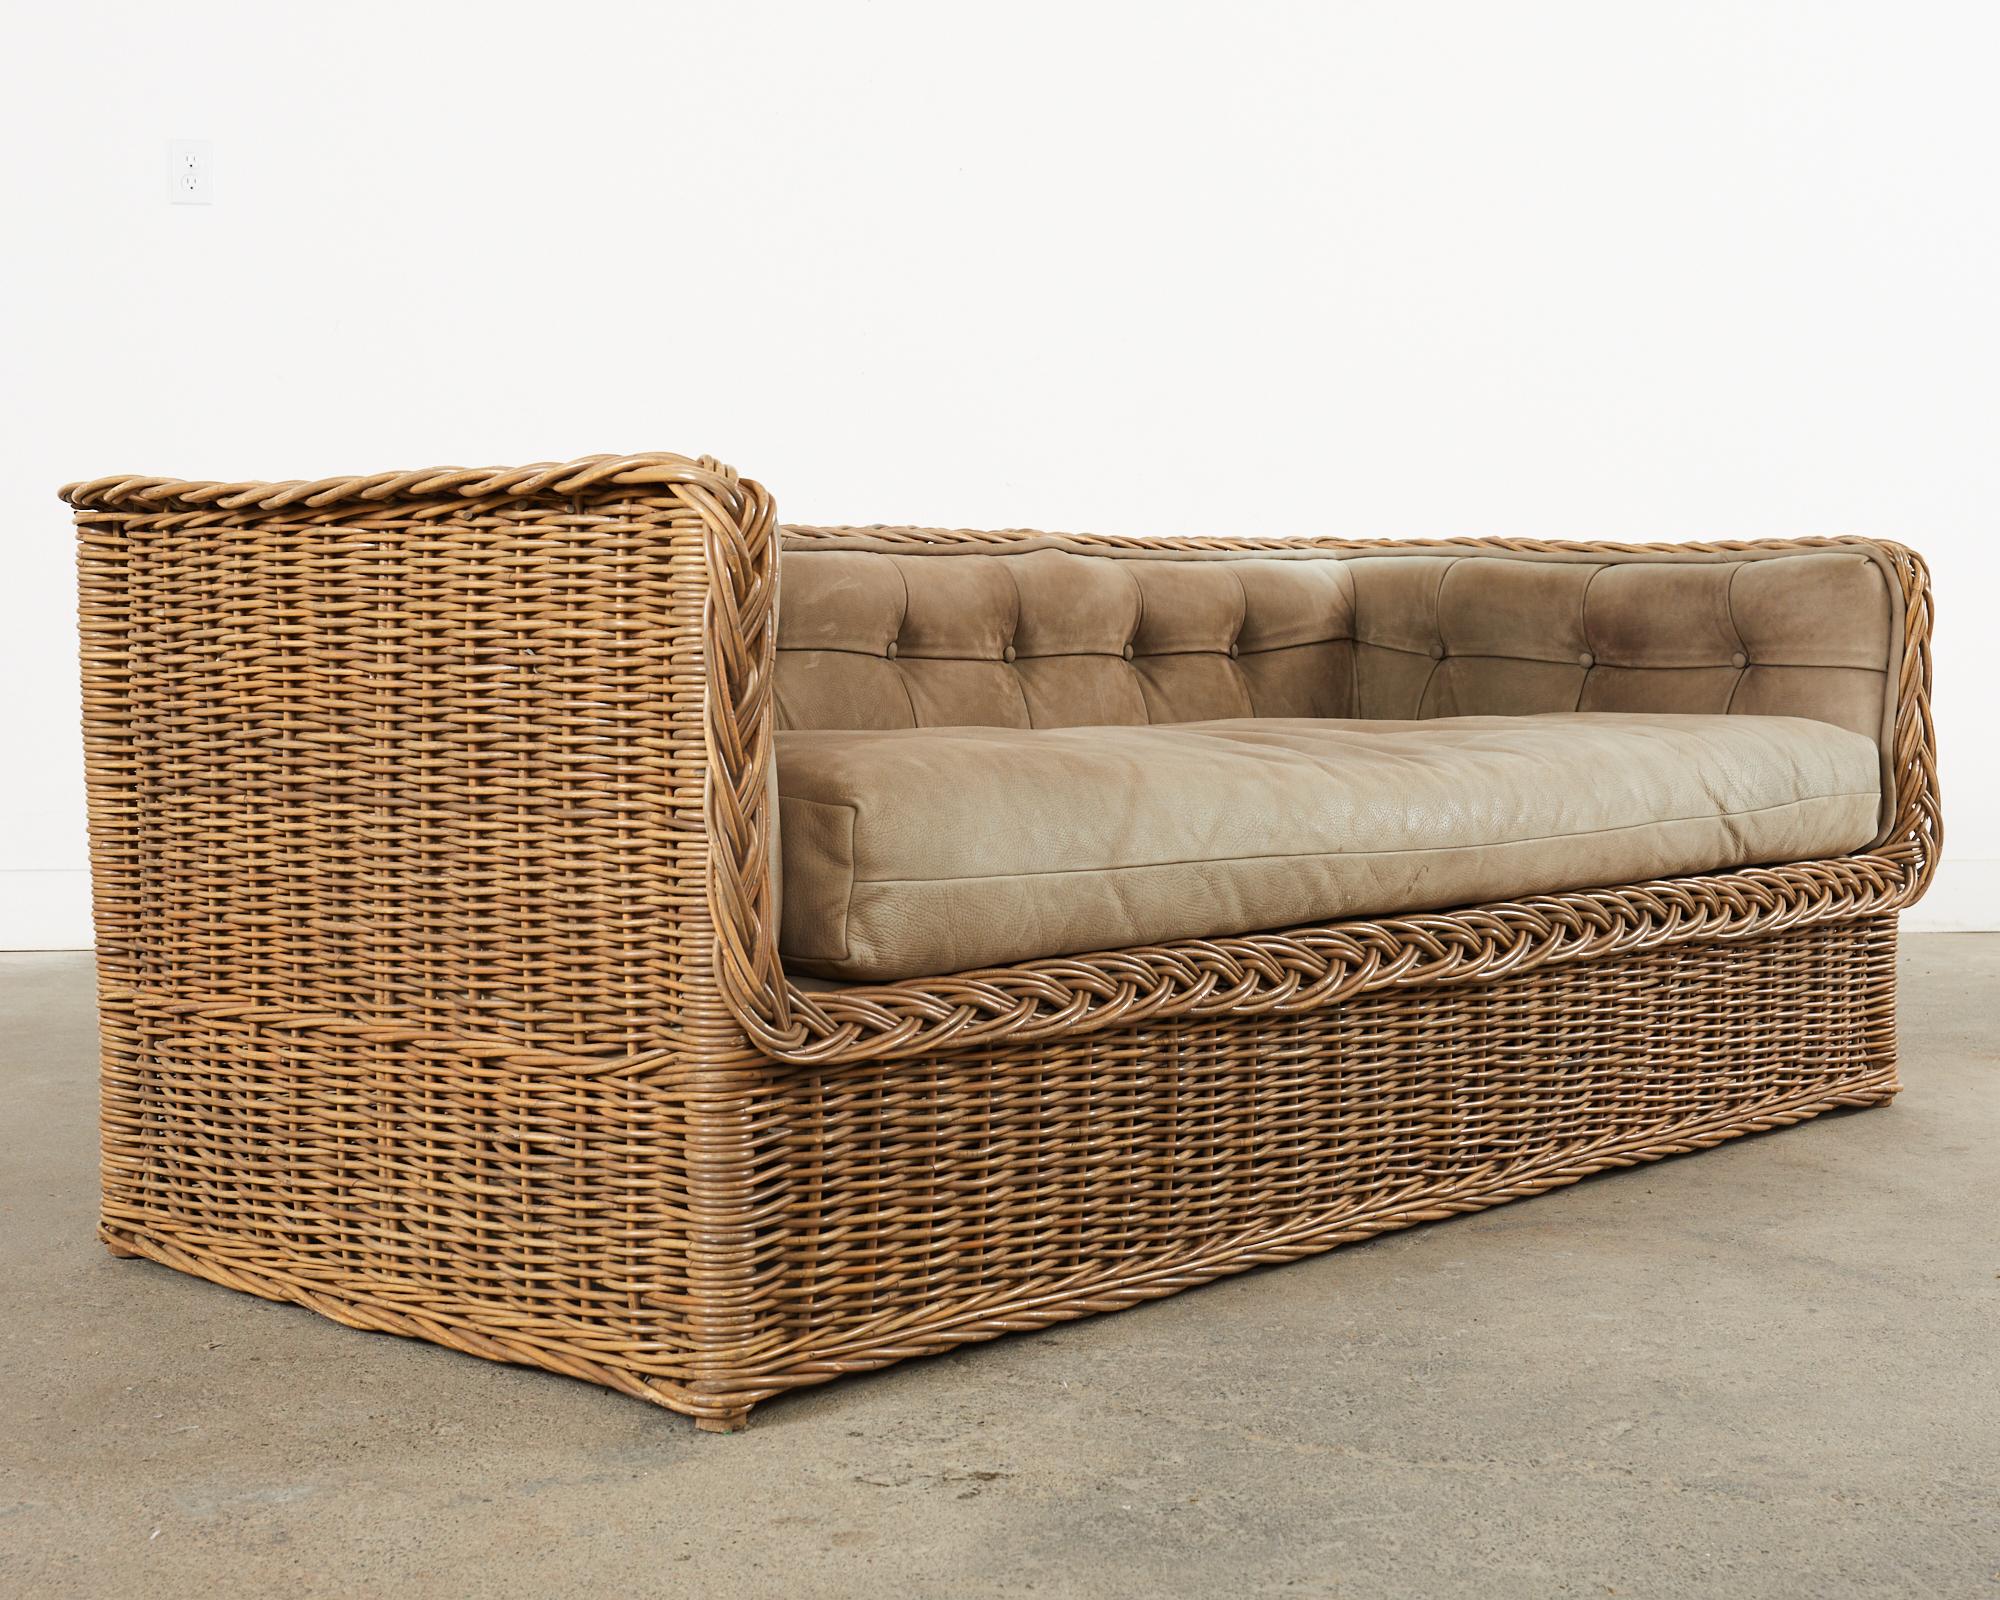 Organic modern daybed sofa crafted from woven wicker rattan in the manner and style of Michael Taylor. Beautifully crafted by Wicker Works San Francisco, CA. The sofa was custom ordered with an optional tufted leather trim and thick loose seat